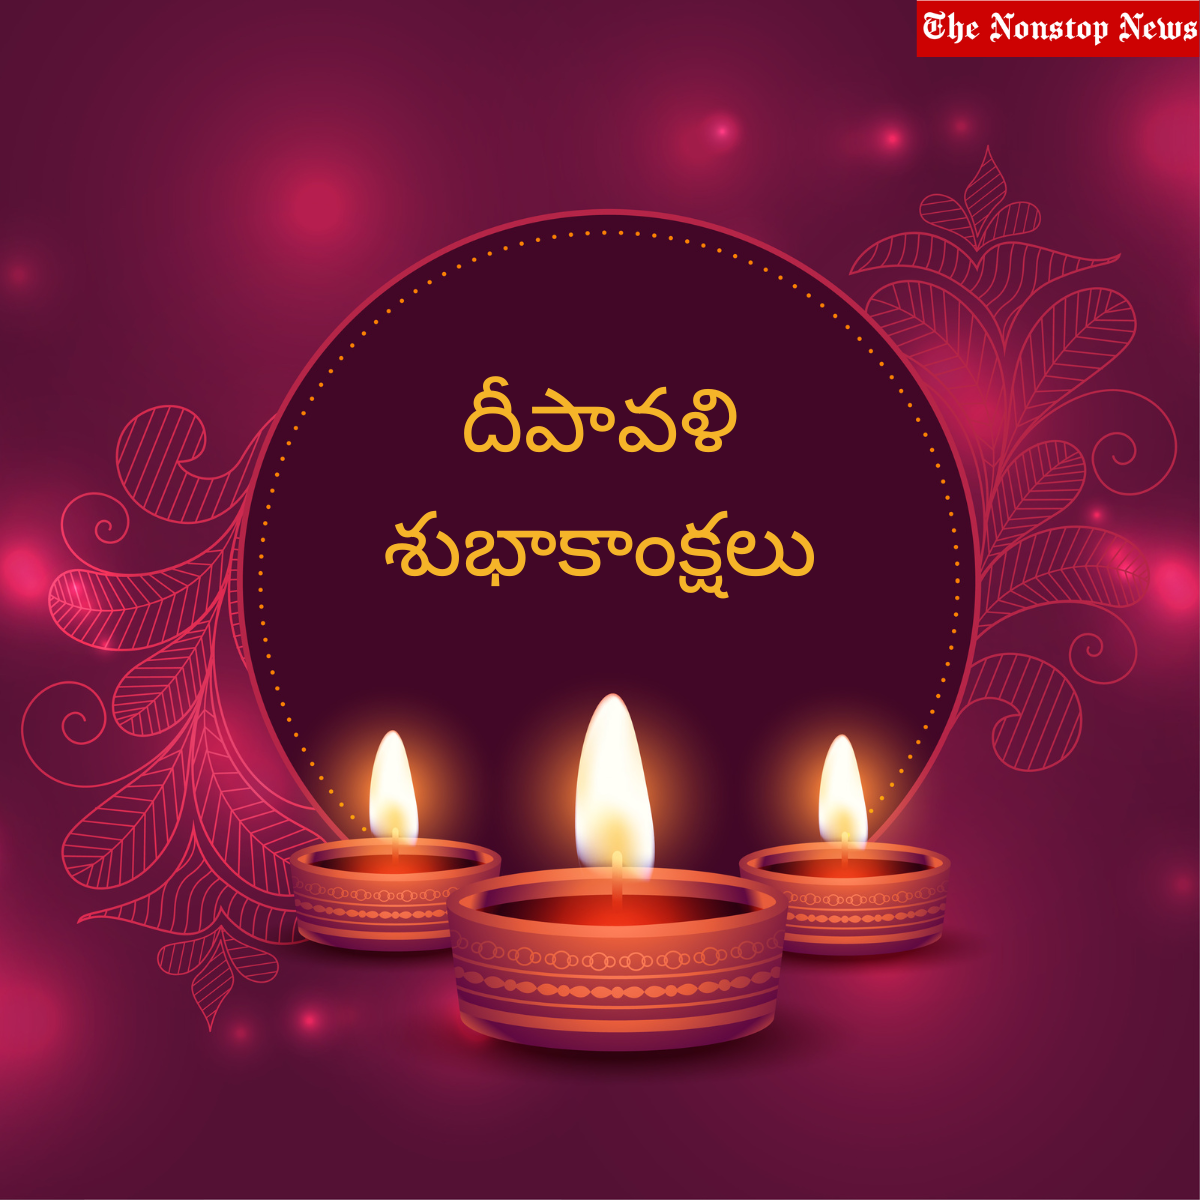 Happy Diwali 2022 Best Telugu and Kannada Wishes, SMS, Messages, Greetings, Quotes, Banners, Posters, and HD Images for Parents